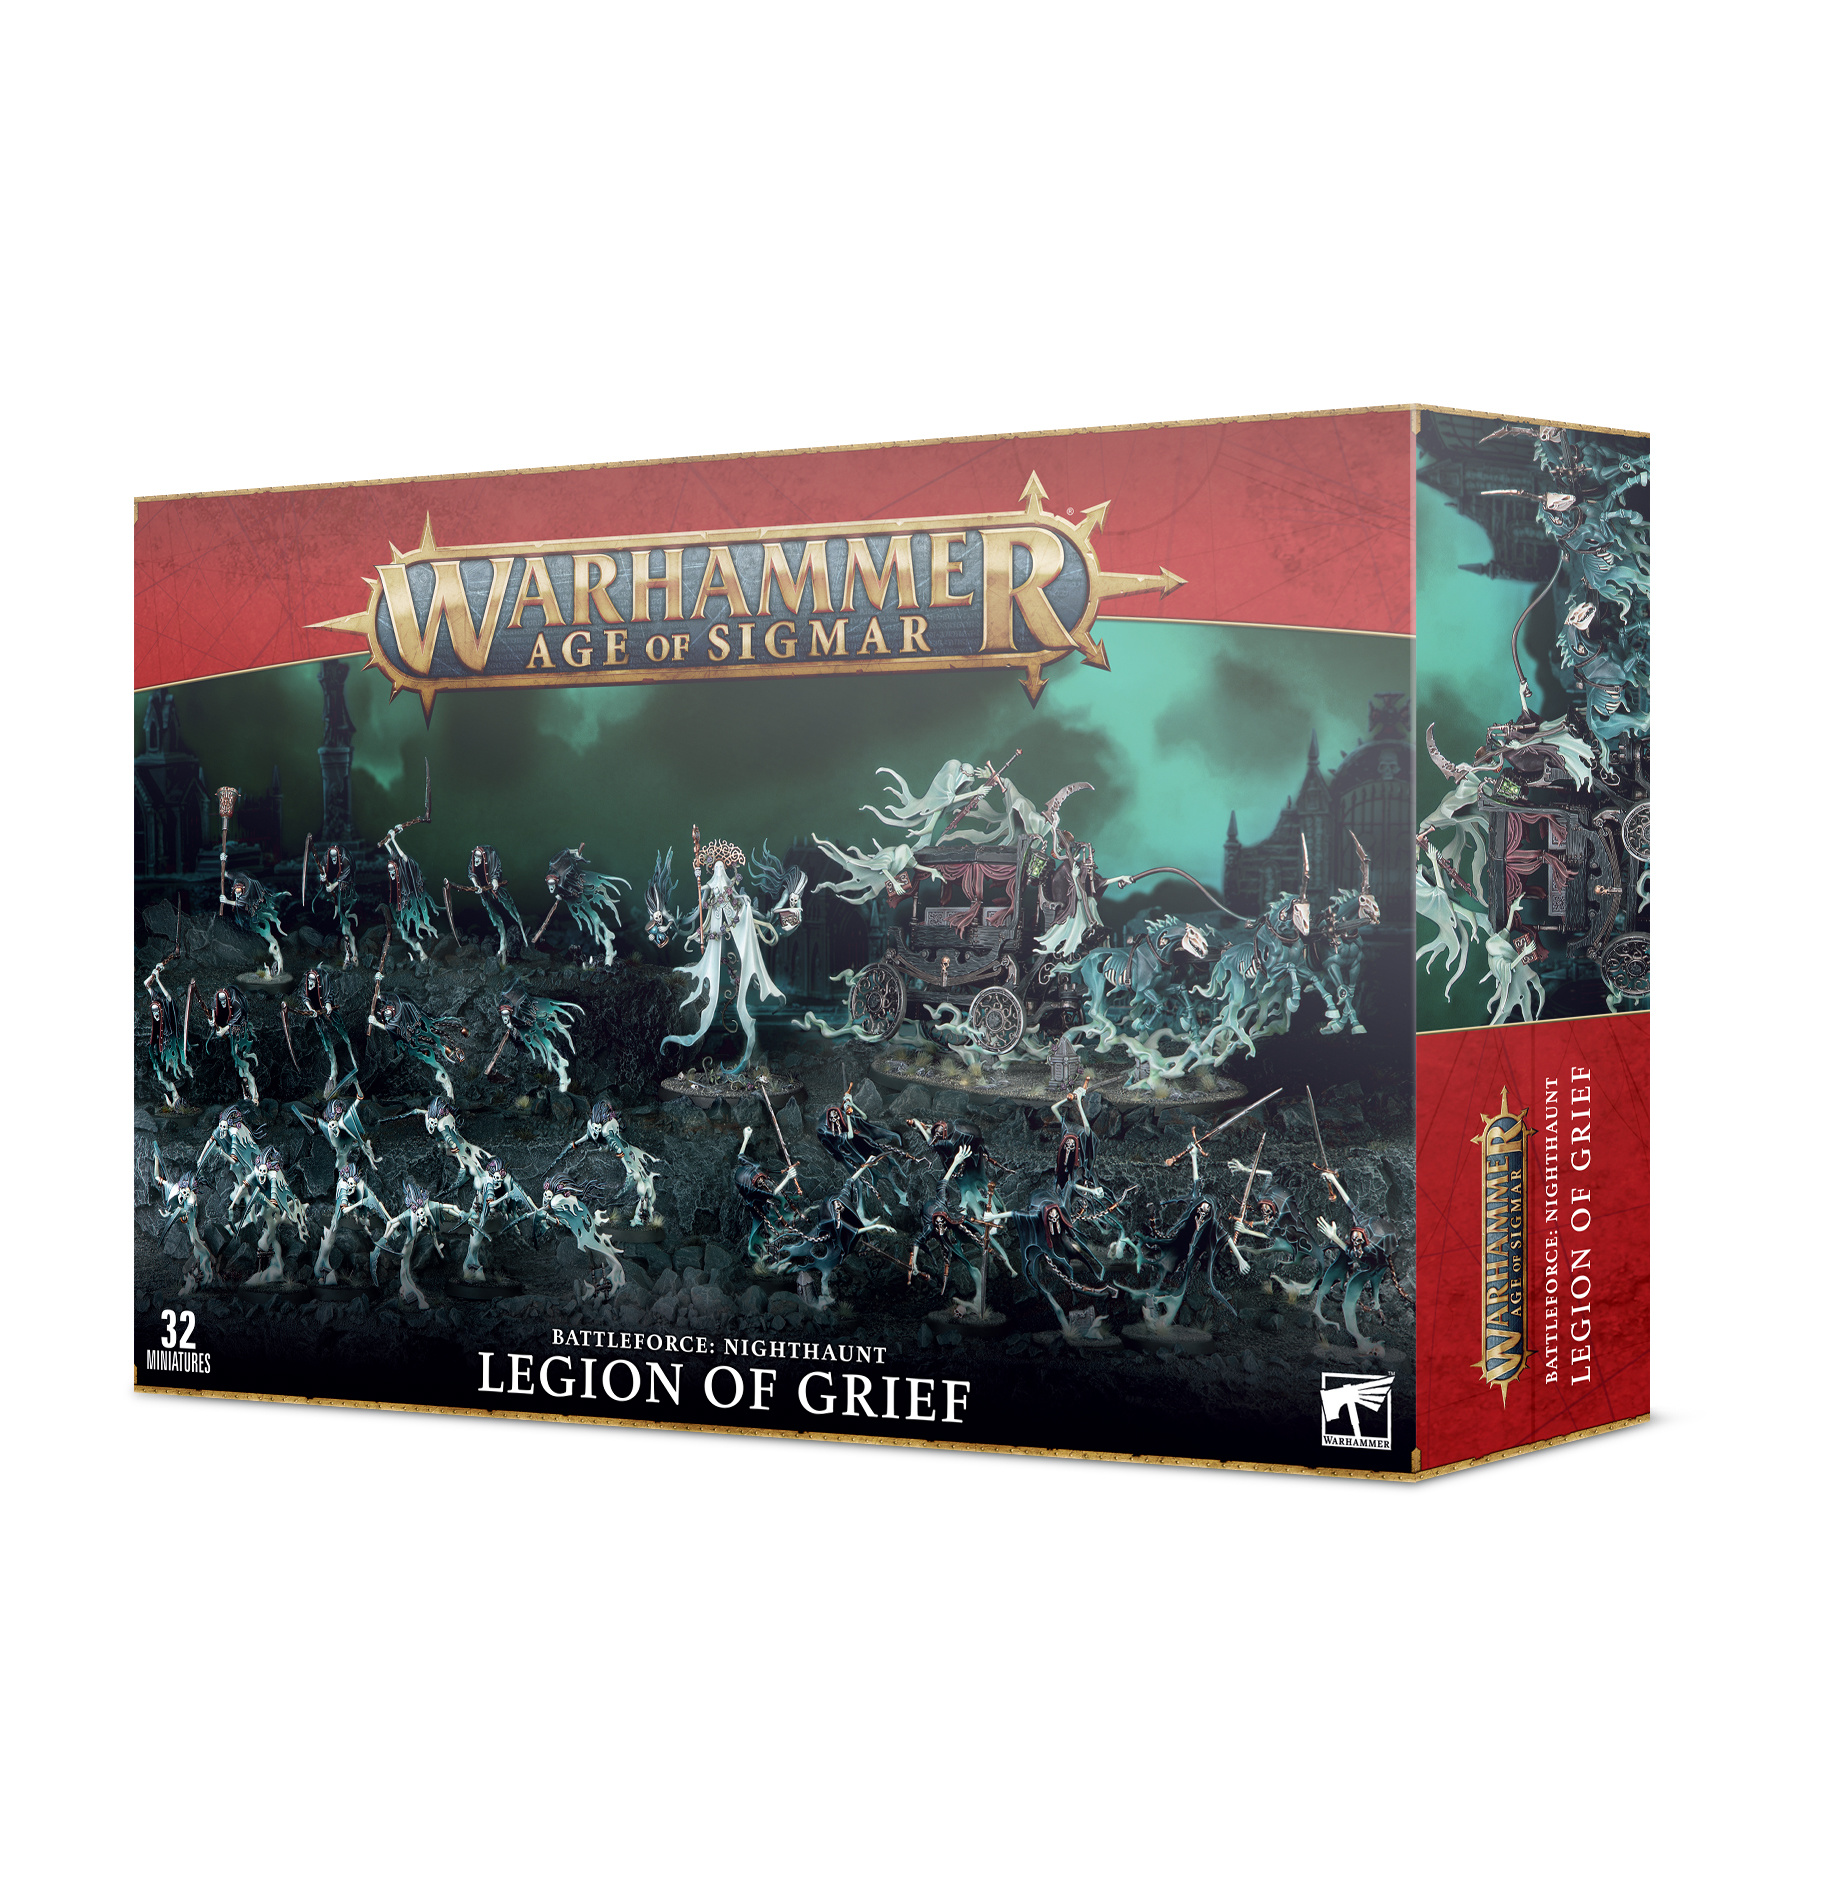 Age of Sigmar battleforces now in stock!!